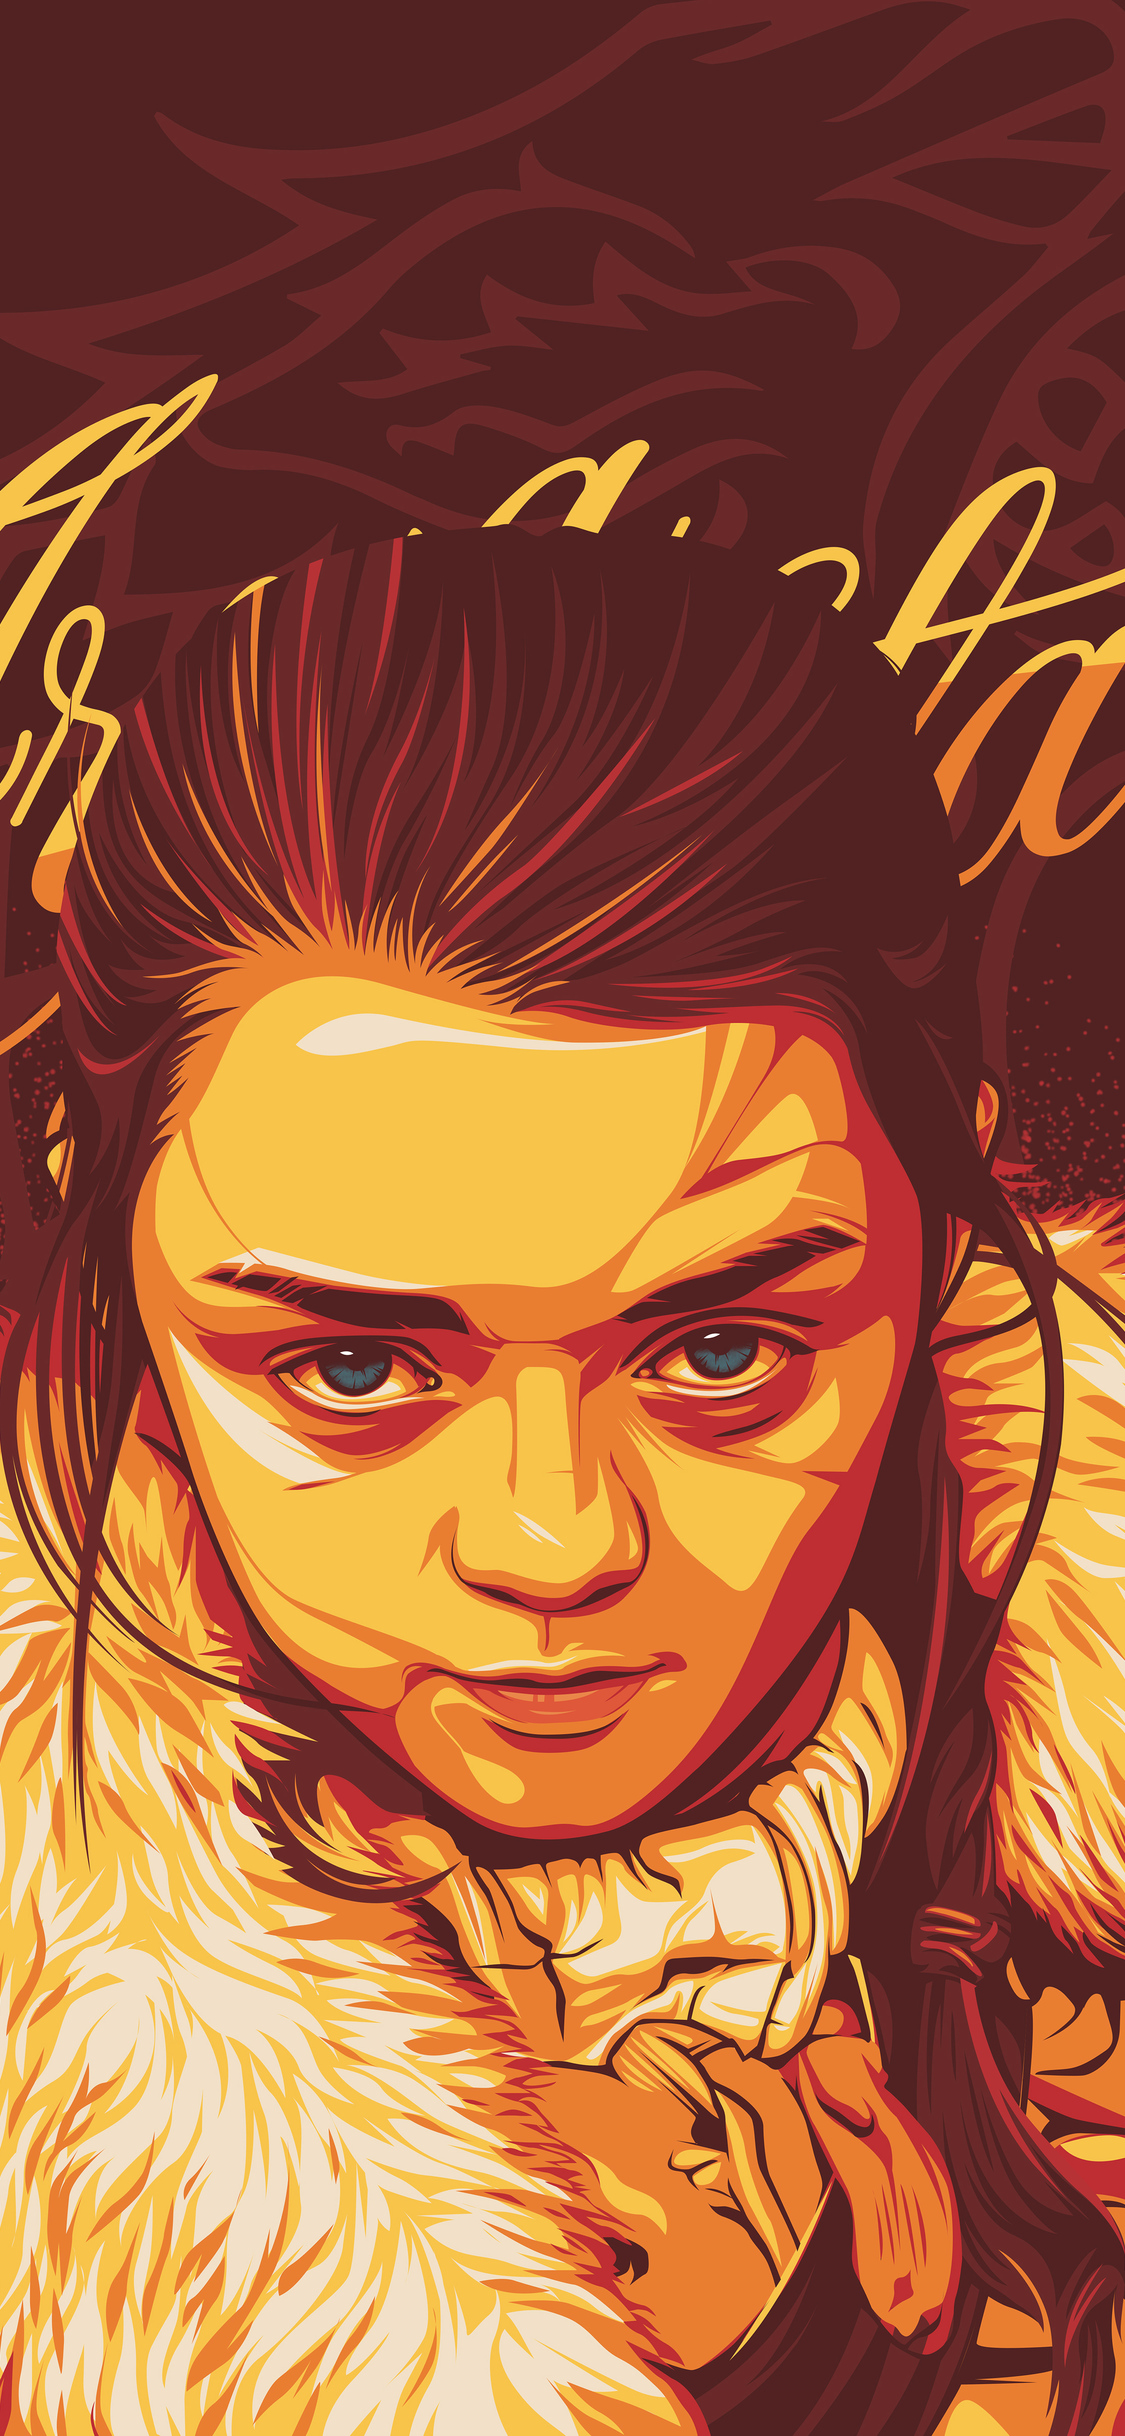 game of thrones phone wallpaper,illustration,art,fictional character,fiction,portrait